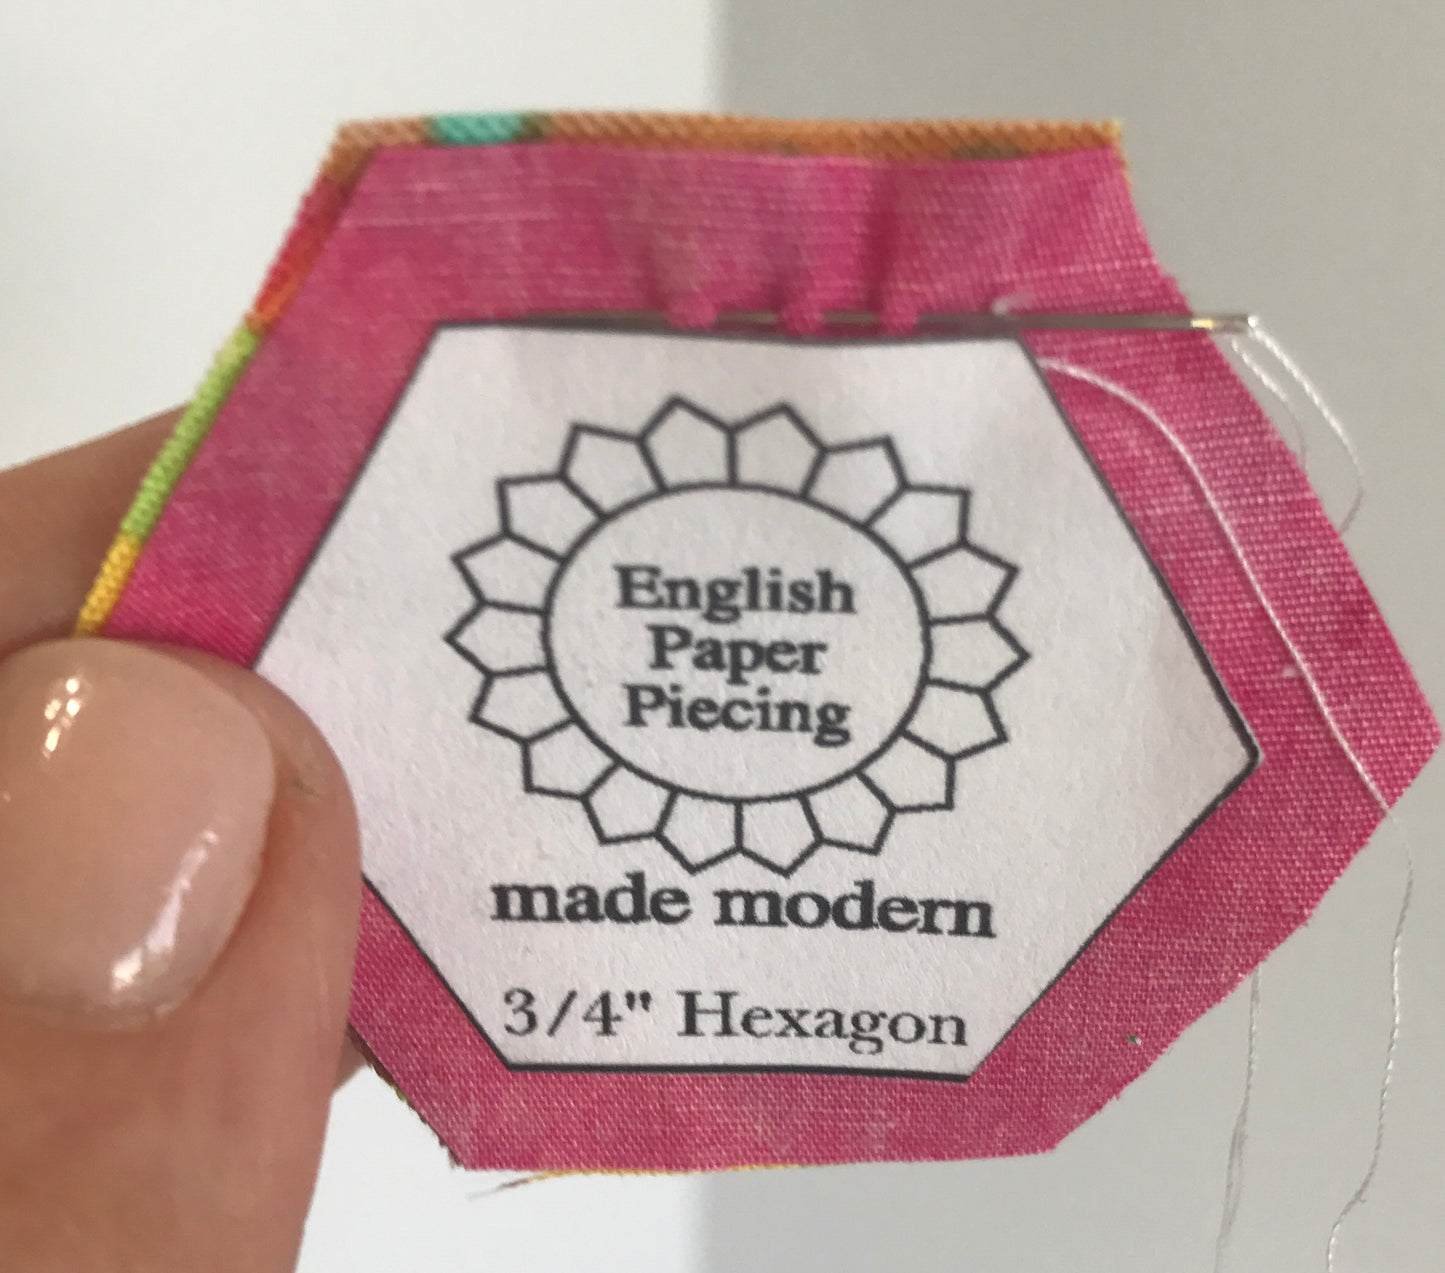 English Paper PIecing Made Modern straight stitch by hand